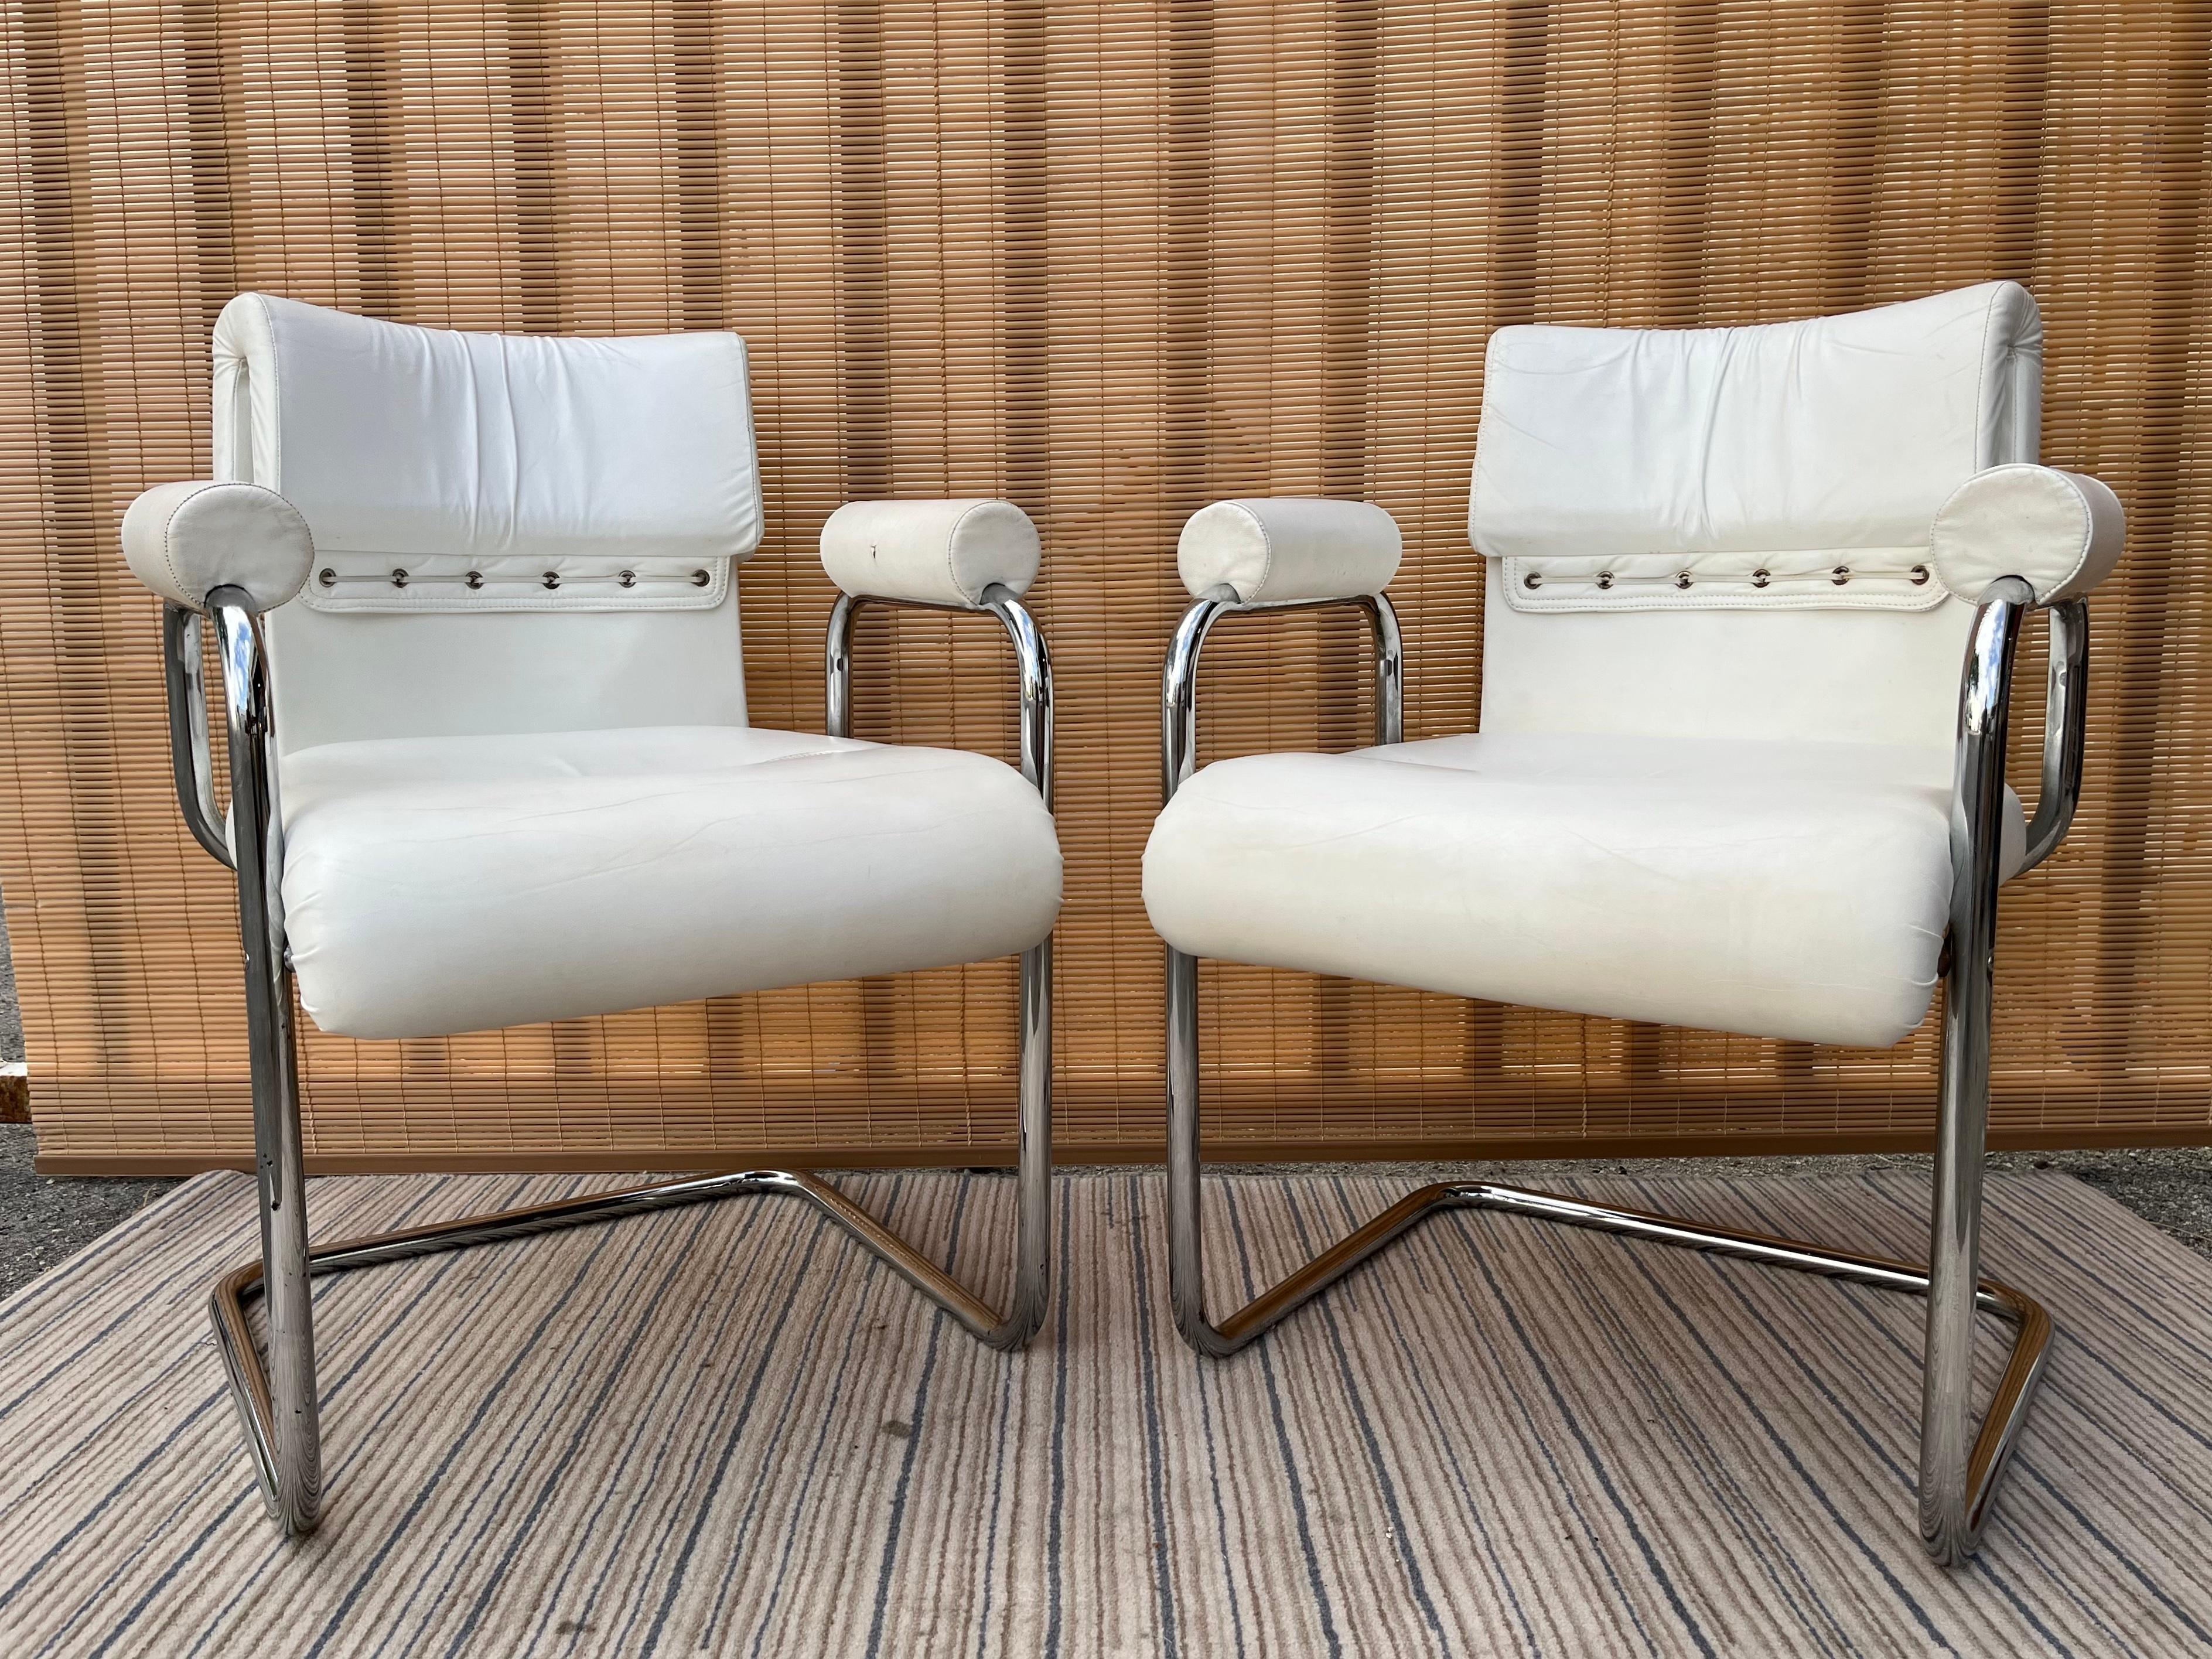 A pair of Iconic Mid-Century Modern Teorema dining armchairs Design by Guido Faleschini and exclusively manufactured by i4Mariani for The Pace Collection. Circa 1970s 
The armchairs feature a cantilever design with a chromed steel tube frame, they